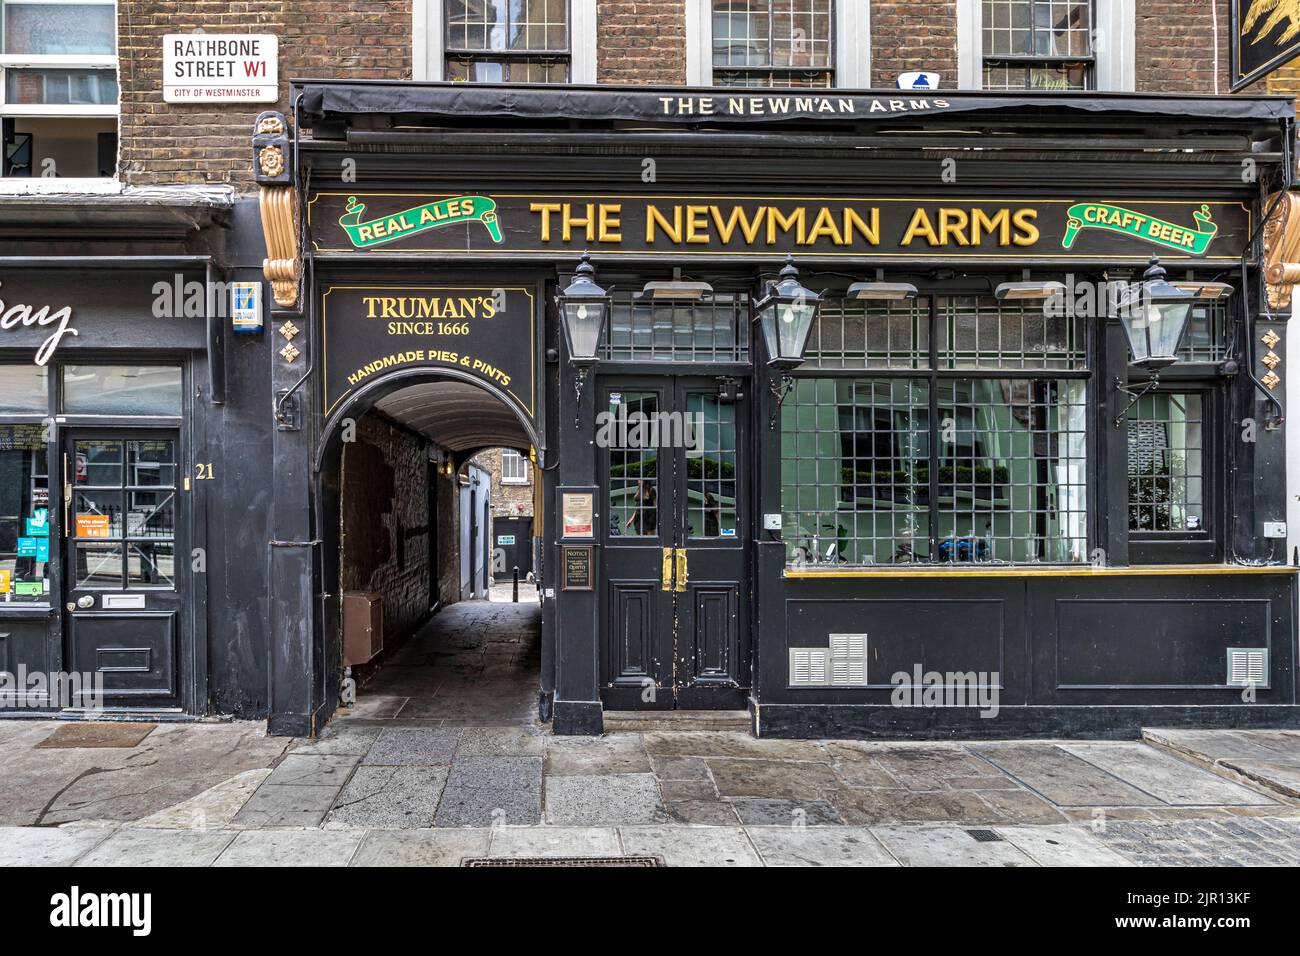 The Newman Arms on Rathbone Street, built in 1730, the pub claims to be the only family run hostelry in Fitzrovia, London W1 Stock Photo